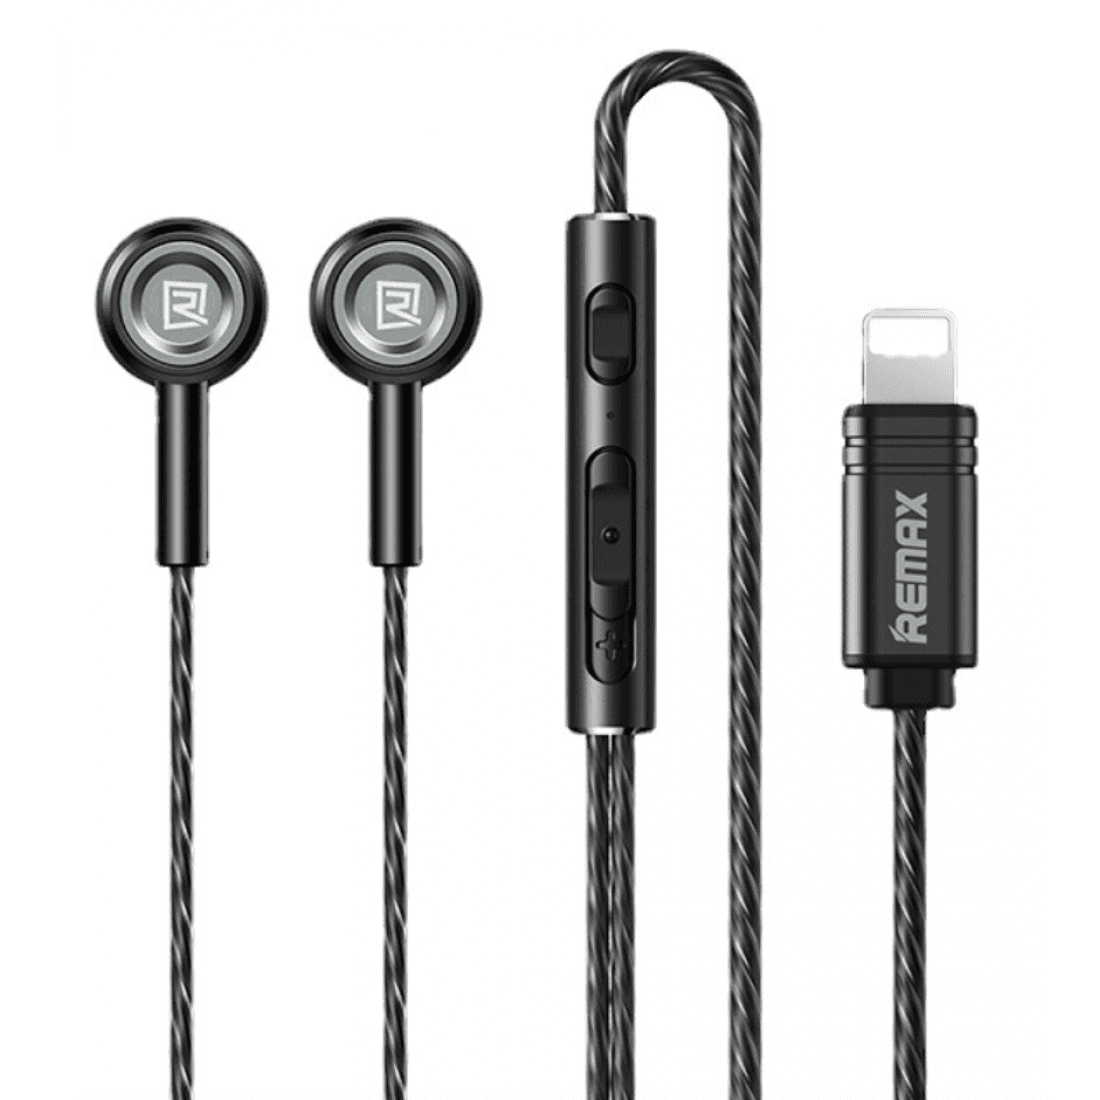 Remax RM 202 Wired Earphone